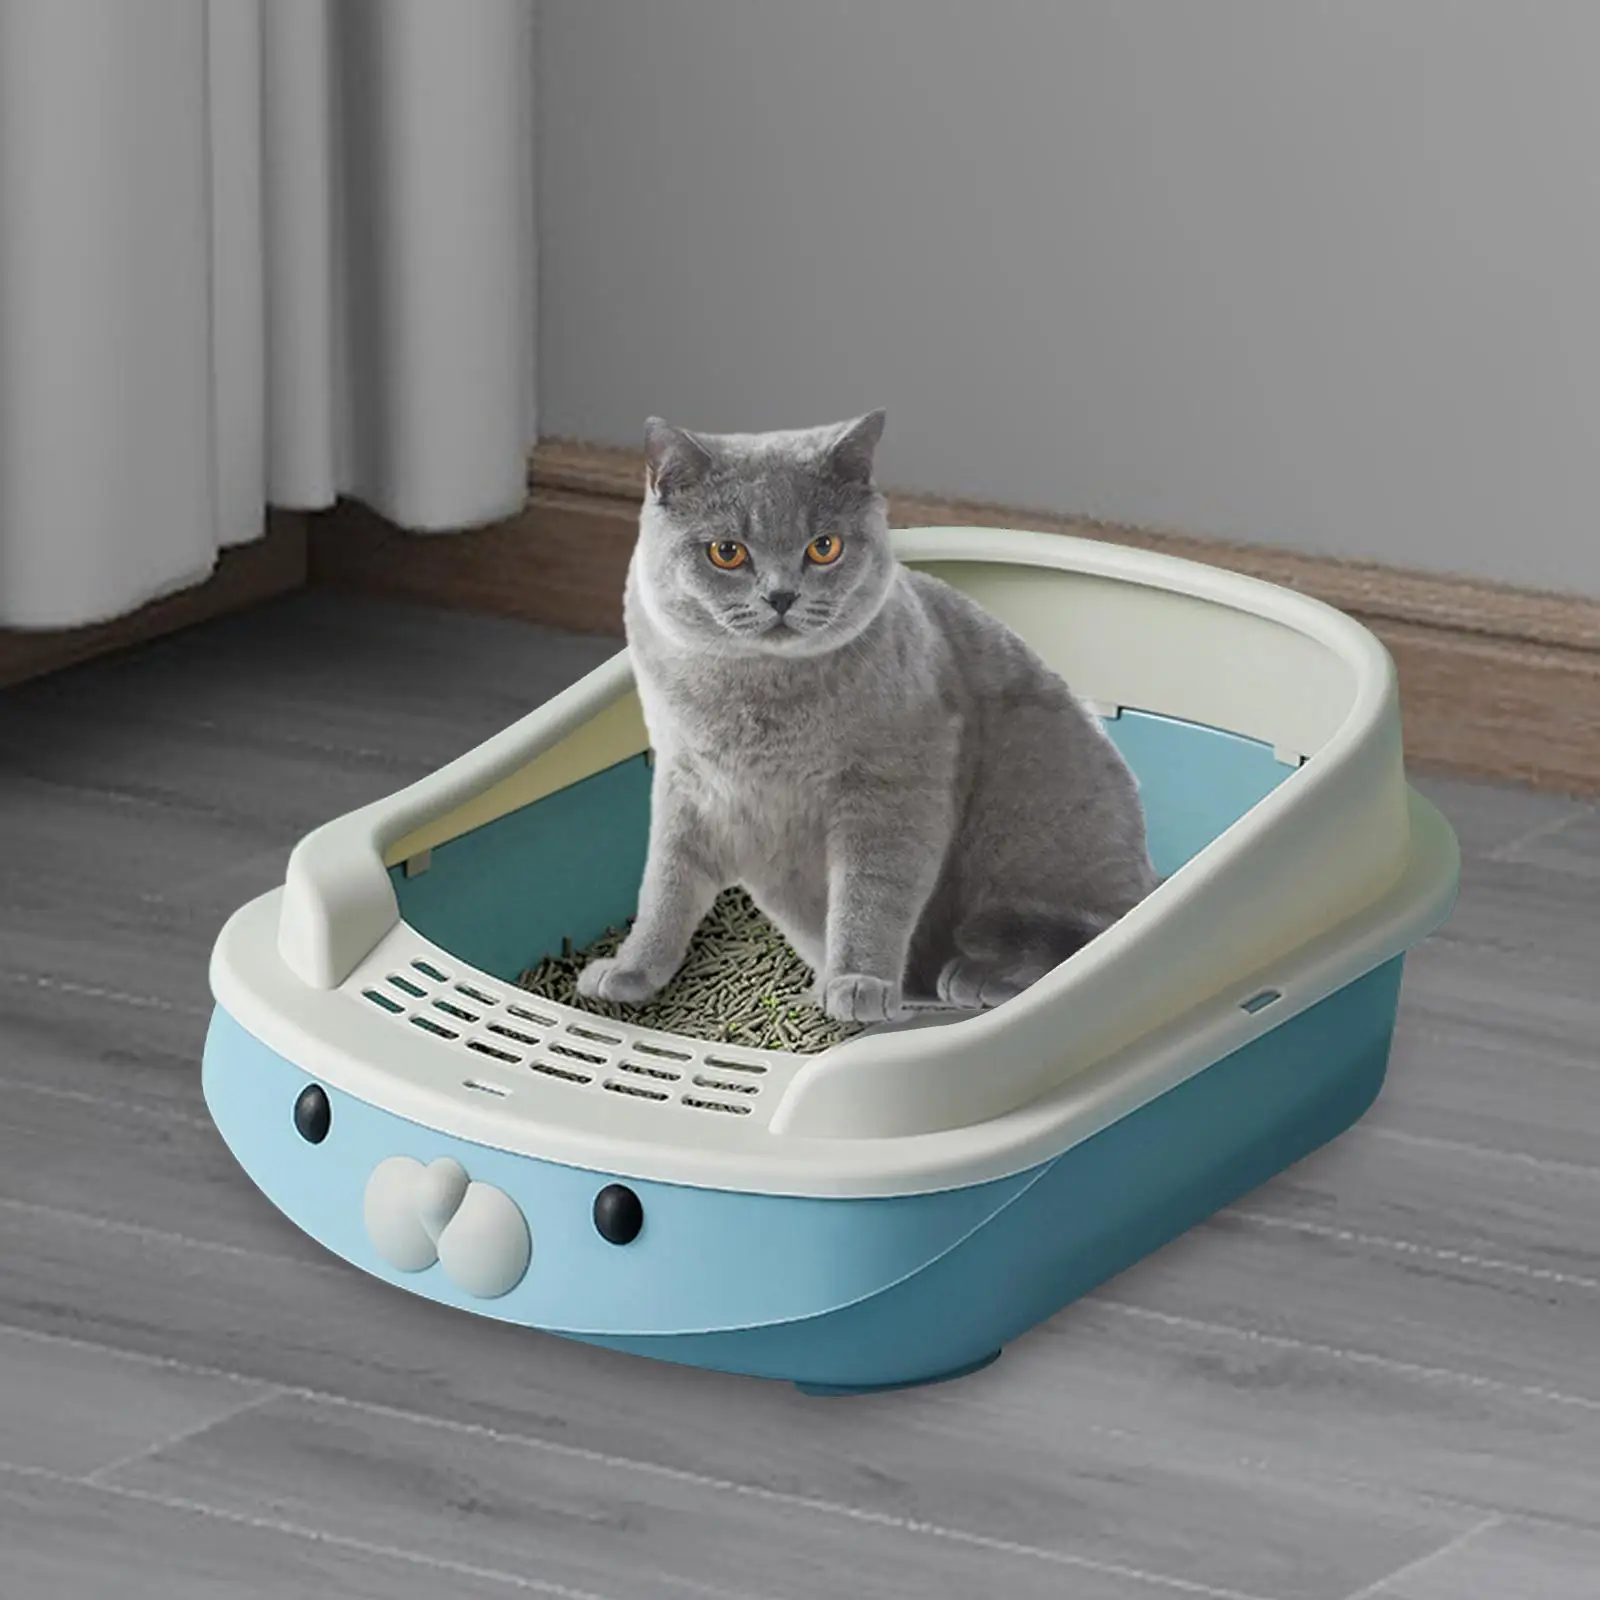 Semi Enclosed Litter Pan with Scoop Cats Litter Pan Low Entry Kitty Travel Litter Tray for Cats Kittens Kitty Dogs Small Pets